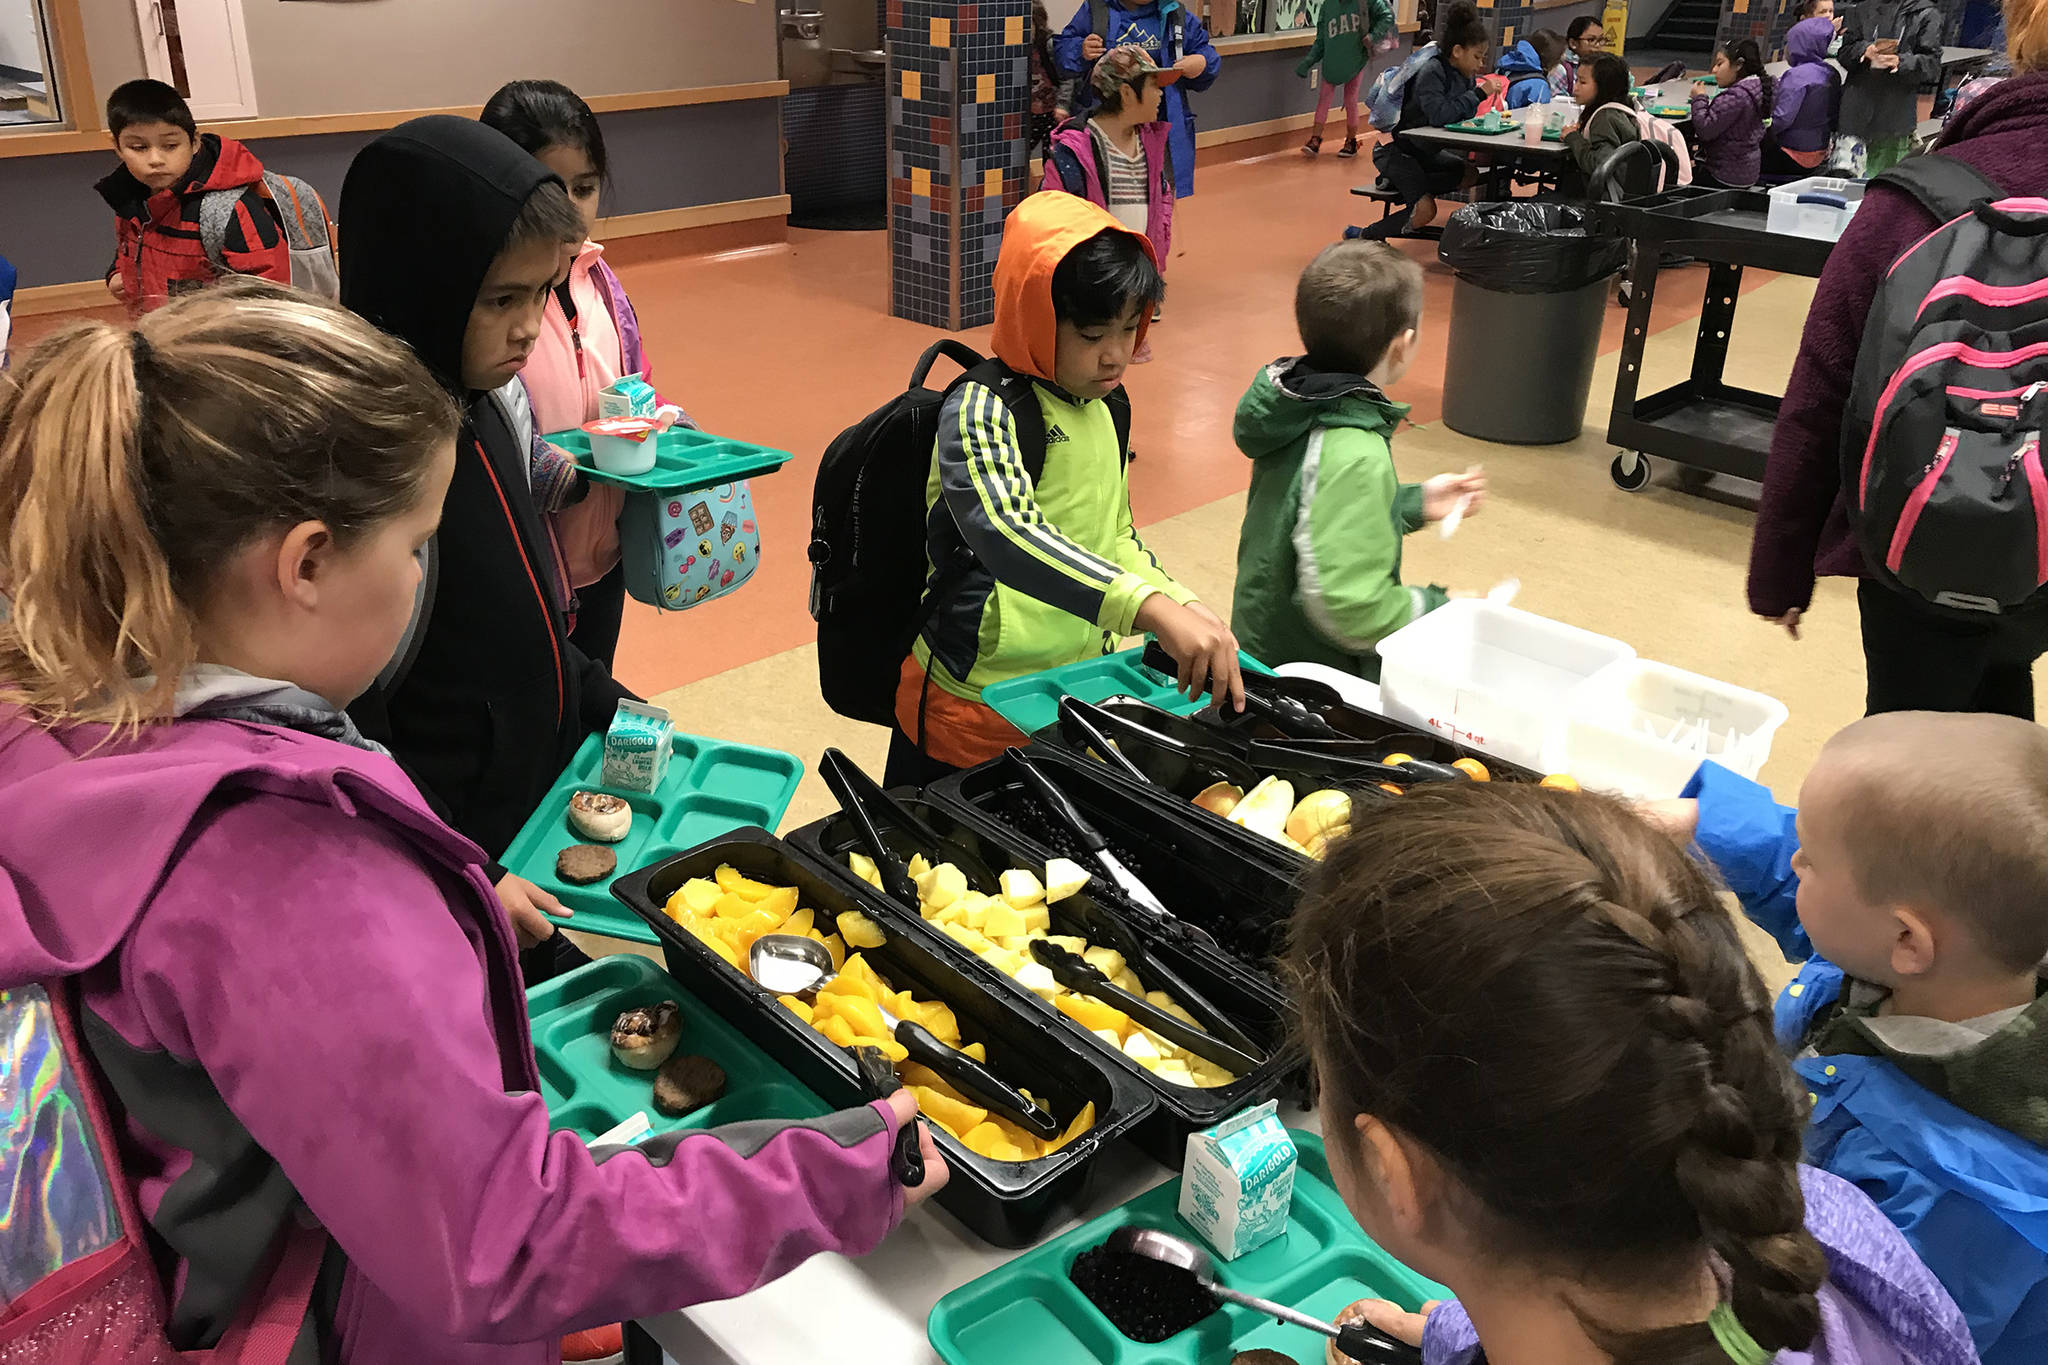 Harborview Elementary School students load up on fruit at a free school breakfast on Friday, Oct. 5, 2018. (Kevin Gullufsen | Juneau Empire)